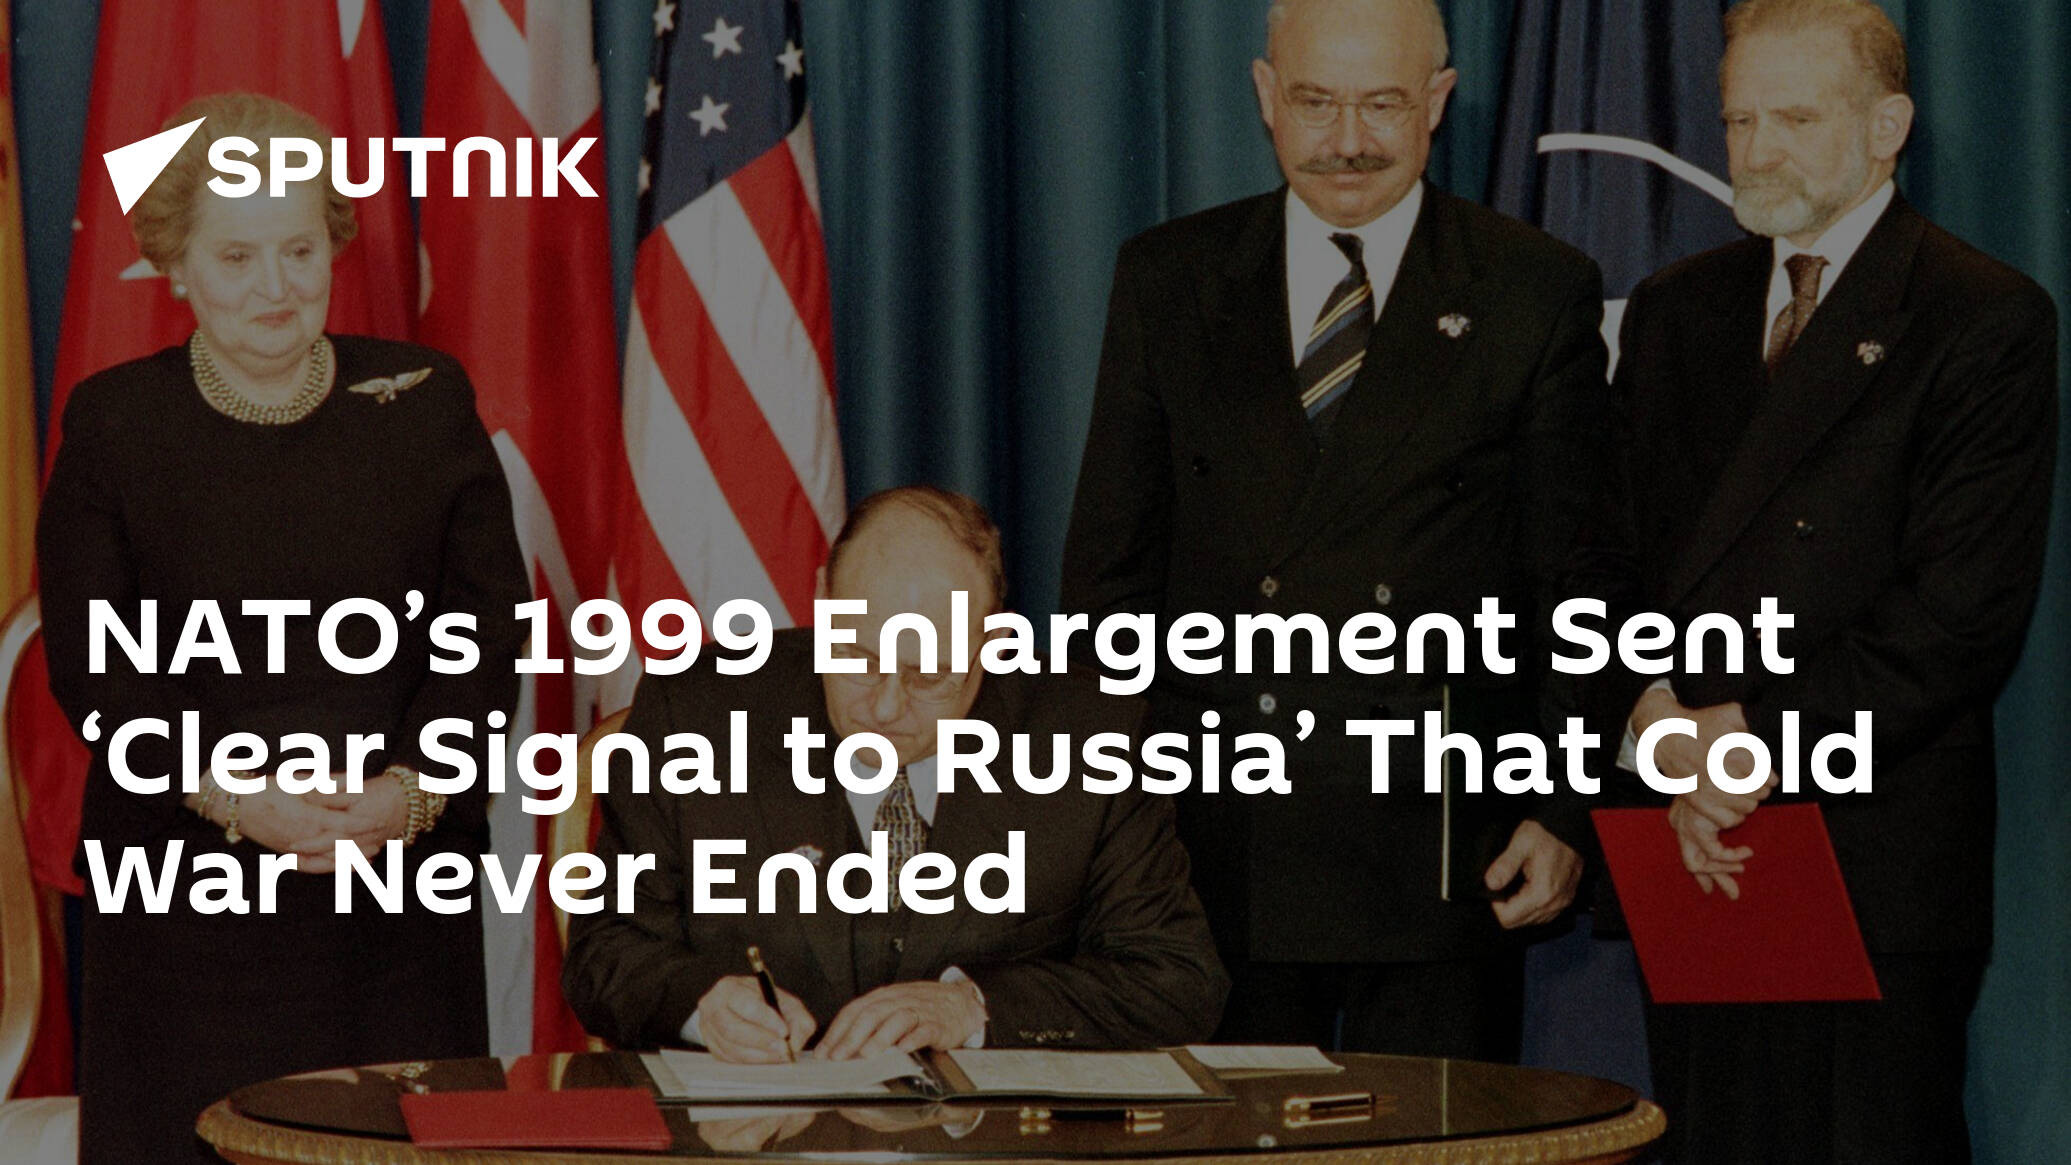 NATO’s 1999 Enlargement Sent ‘Clear Signal to Russia’ That Cold War Never Ended